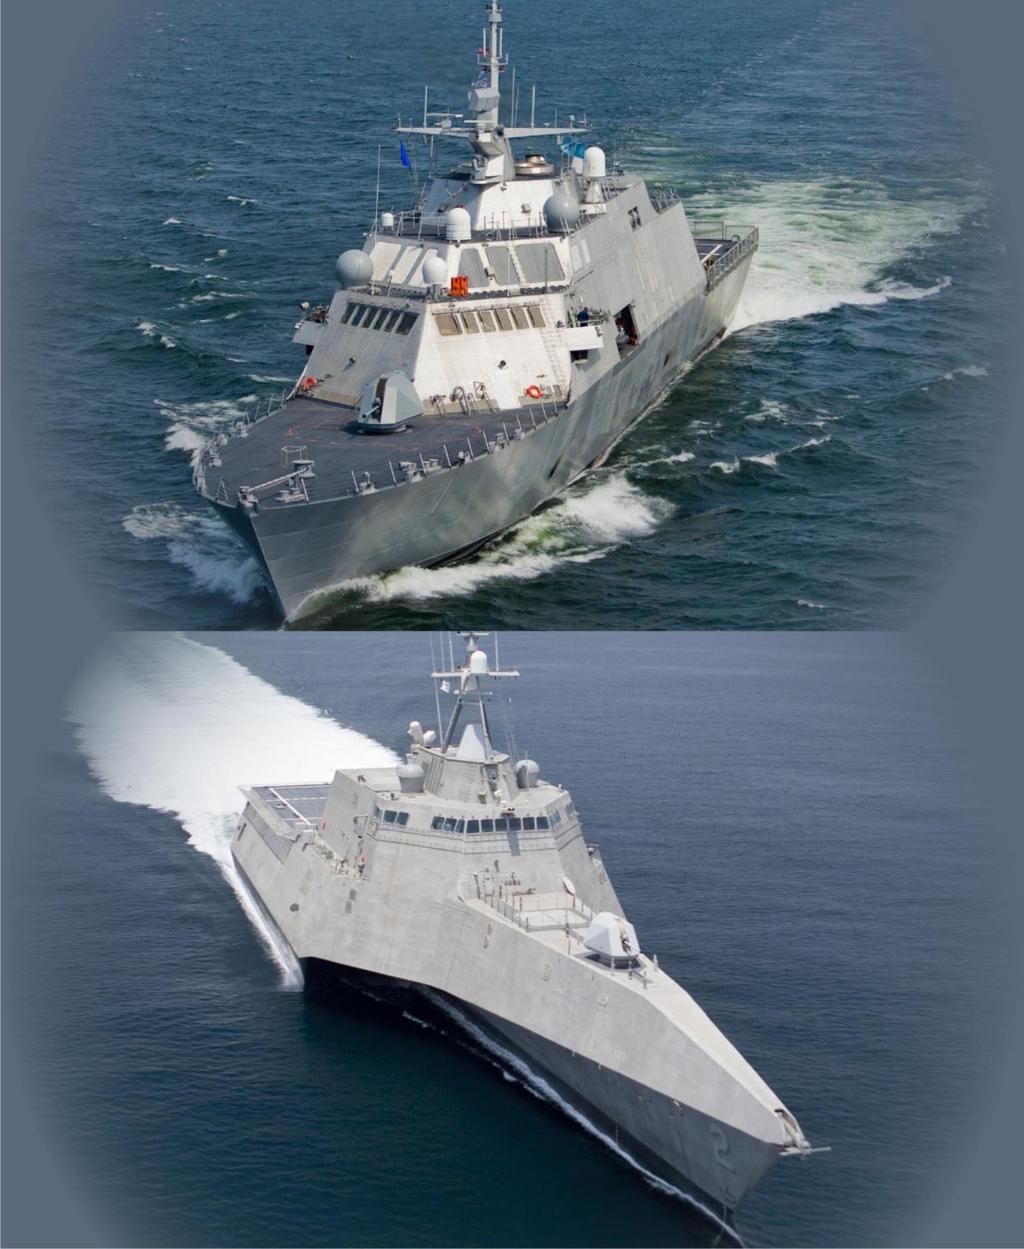 Figure 1. Lockheed LCS Design (Top) and General Dynamics LCS Design (Bottom) Source: U.S. Navy file photo accessed by CRS at http://www.